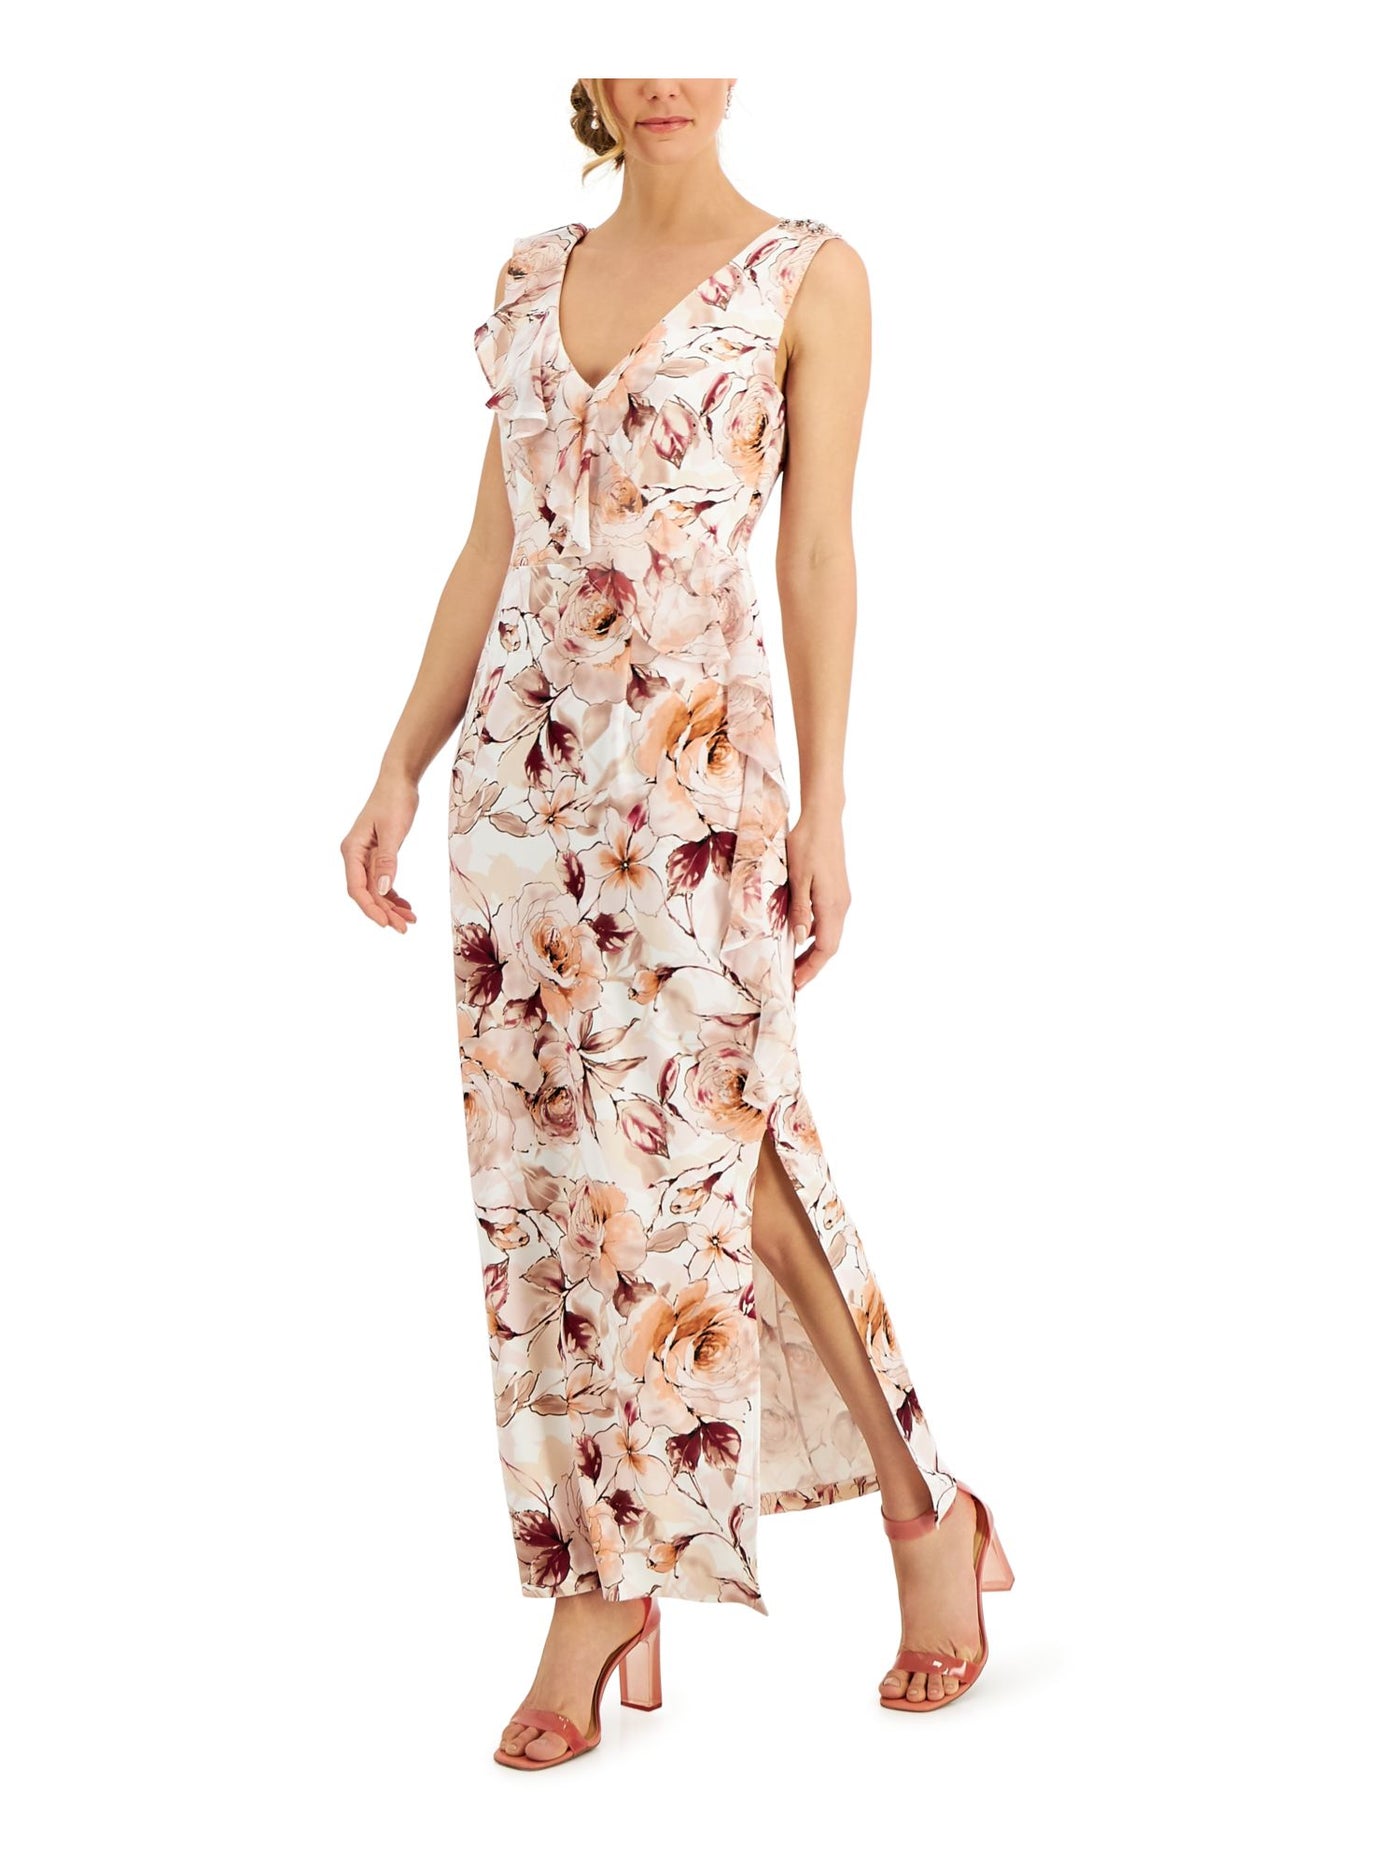 CONNECTED APPAREL Womens Beige Stretch Zippered Ruffled Slit Scuba Floral Sleeveless V Neck Maxi Cocktail Sheath Dress 4